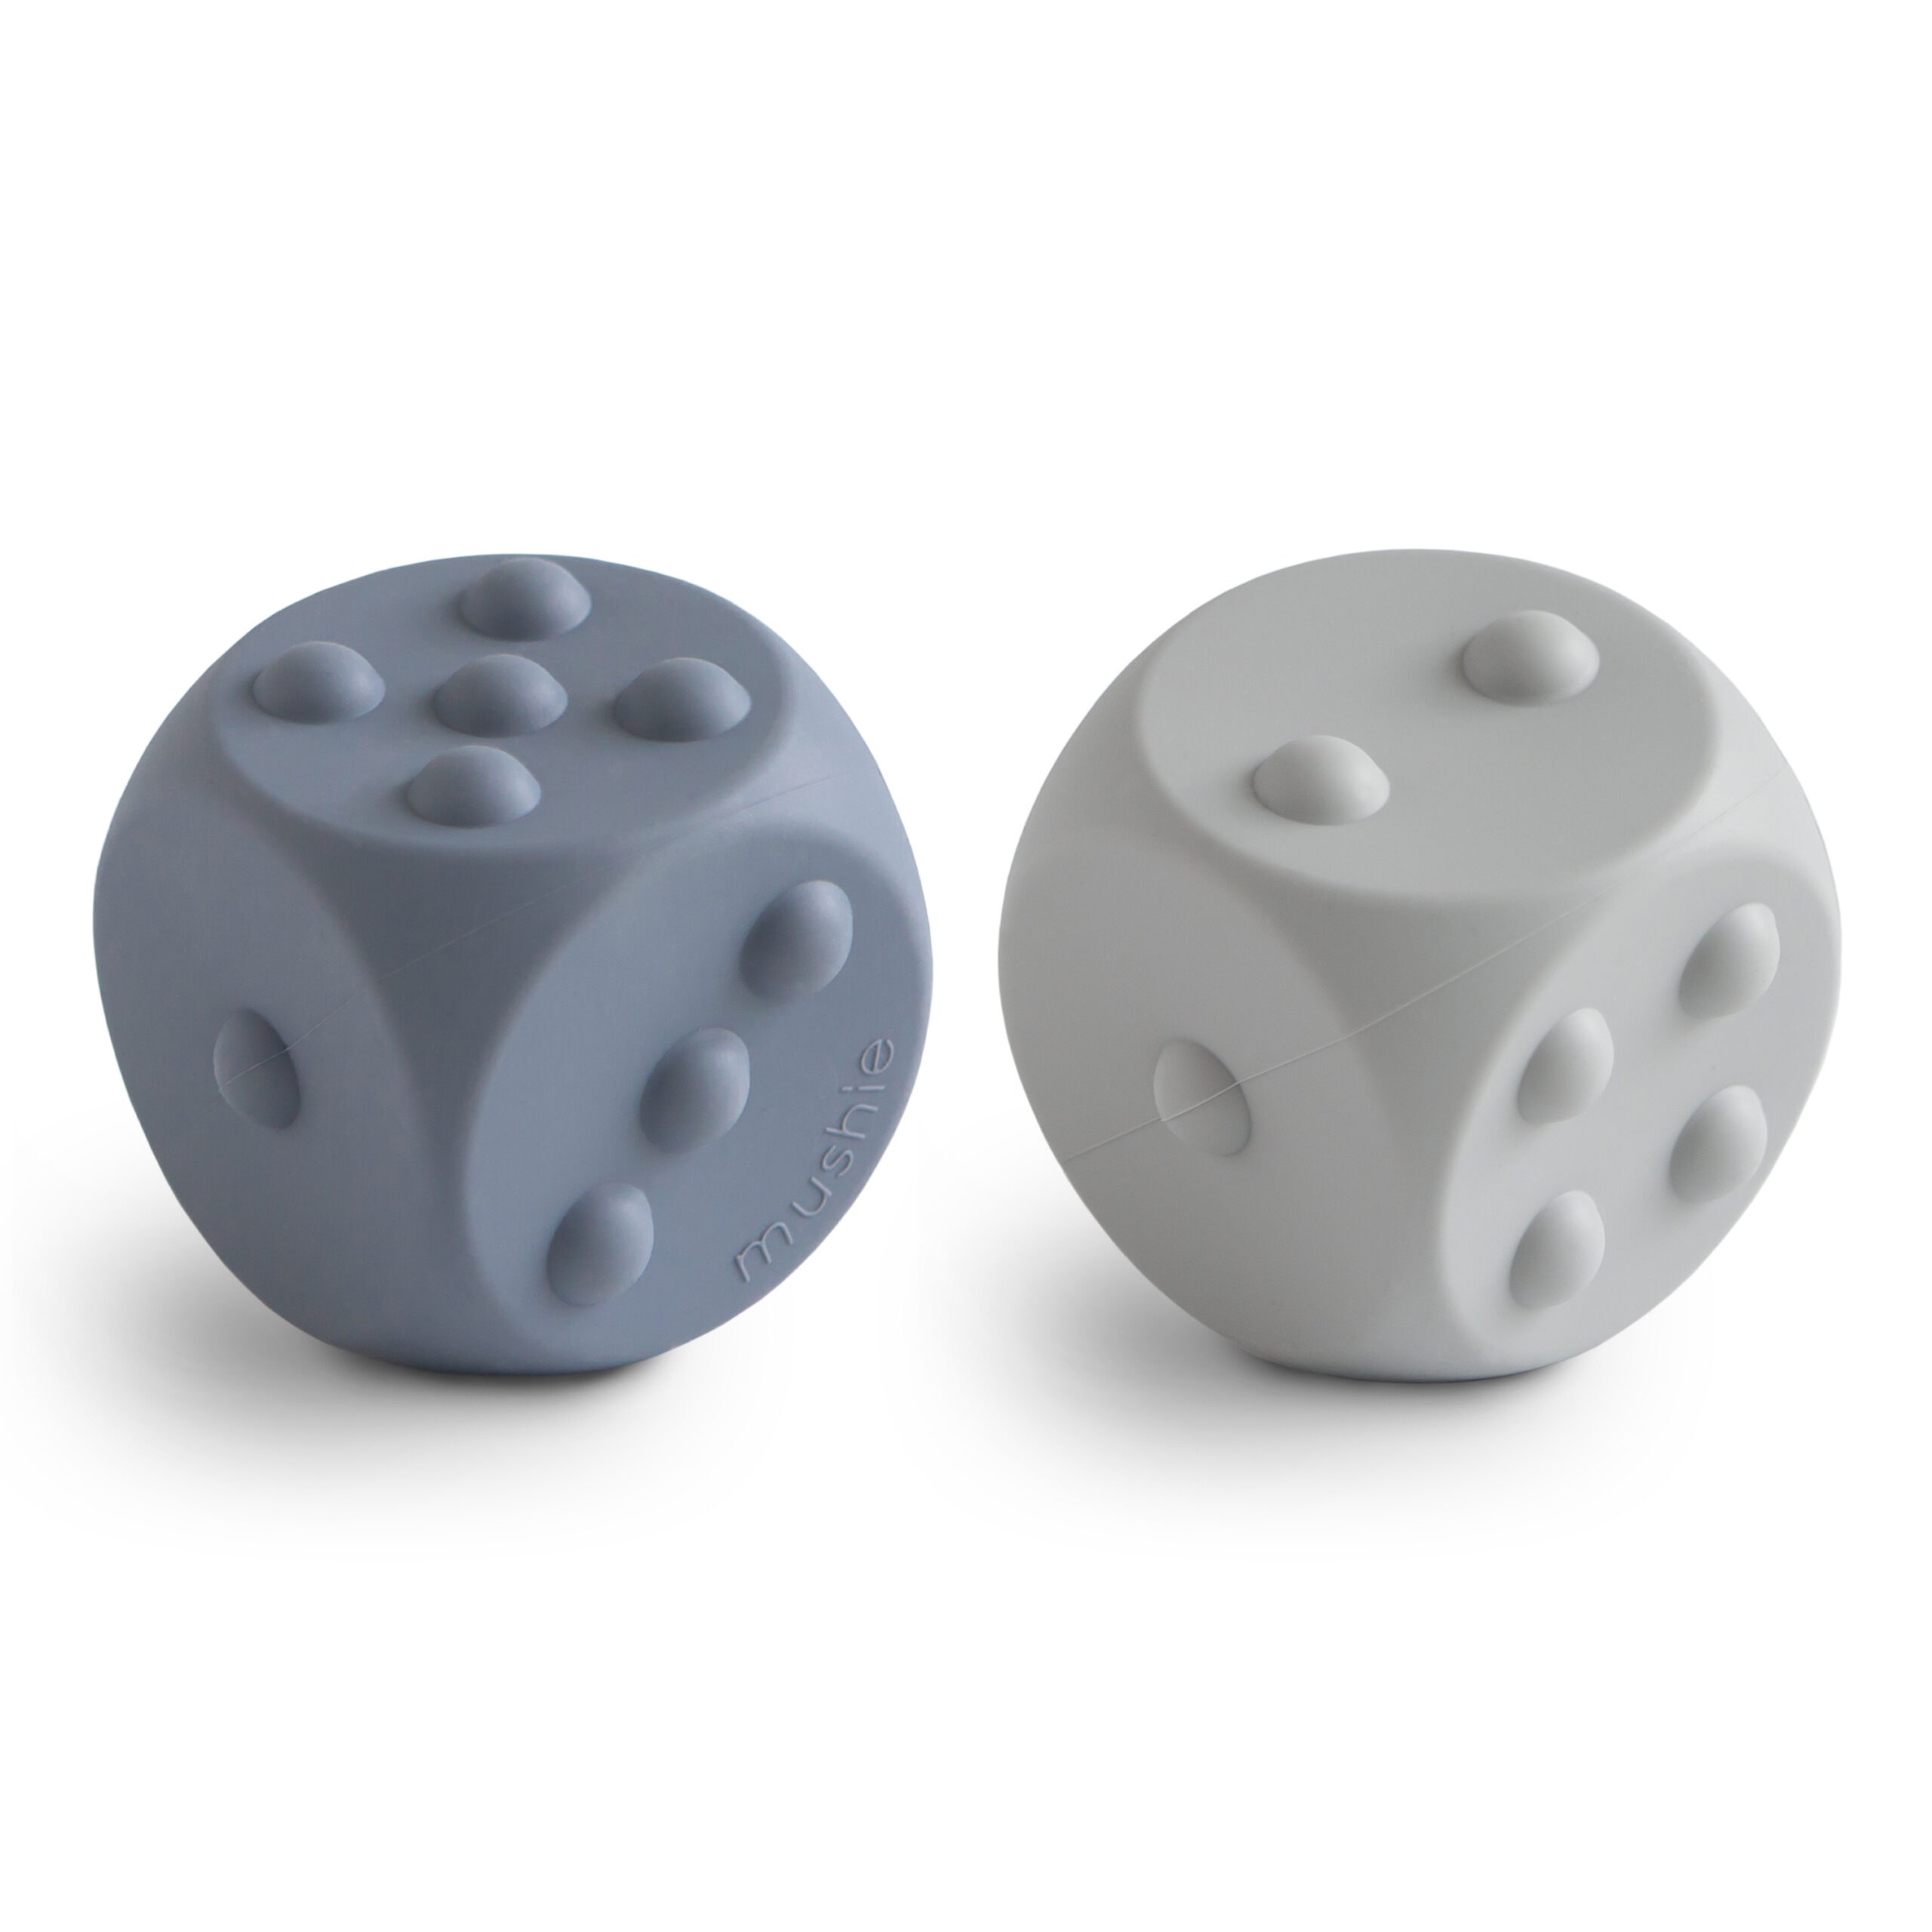 Tradewinds+Stone_Dice Press Toy 2pack